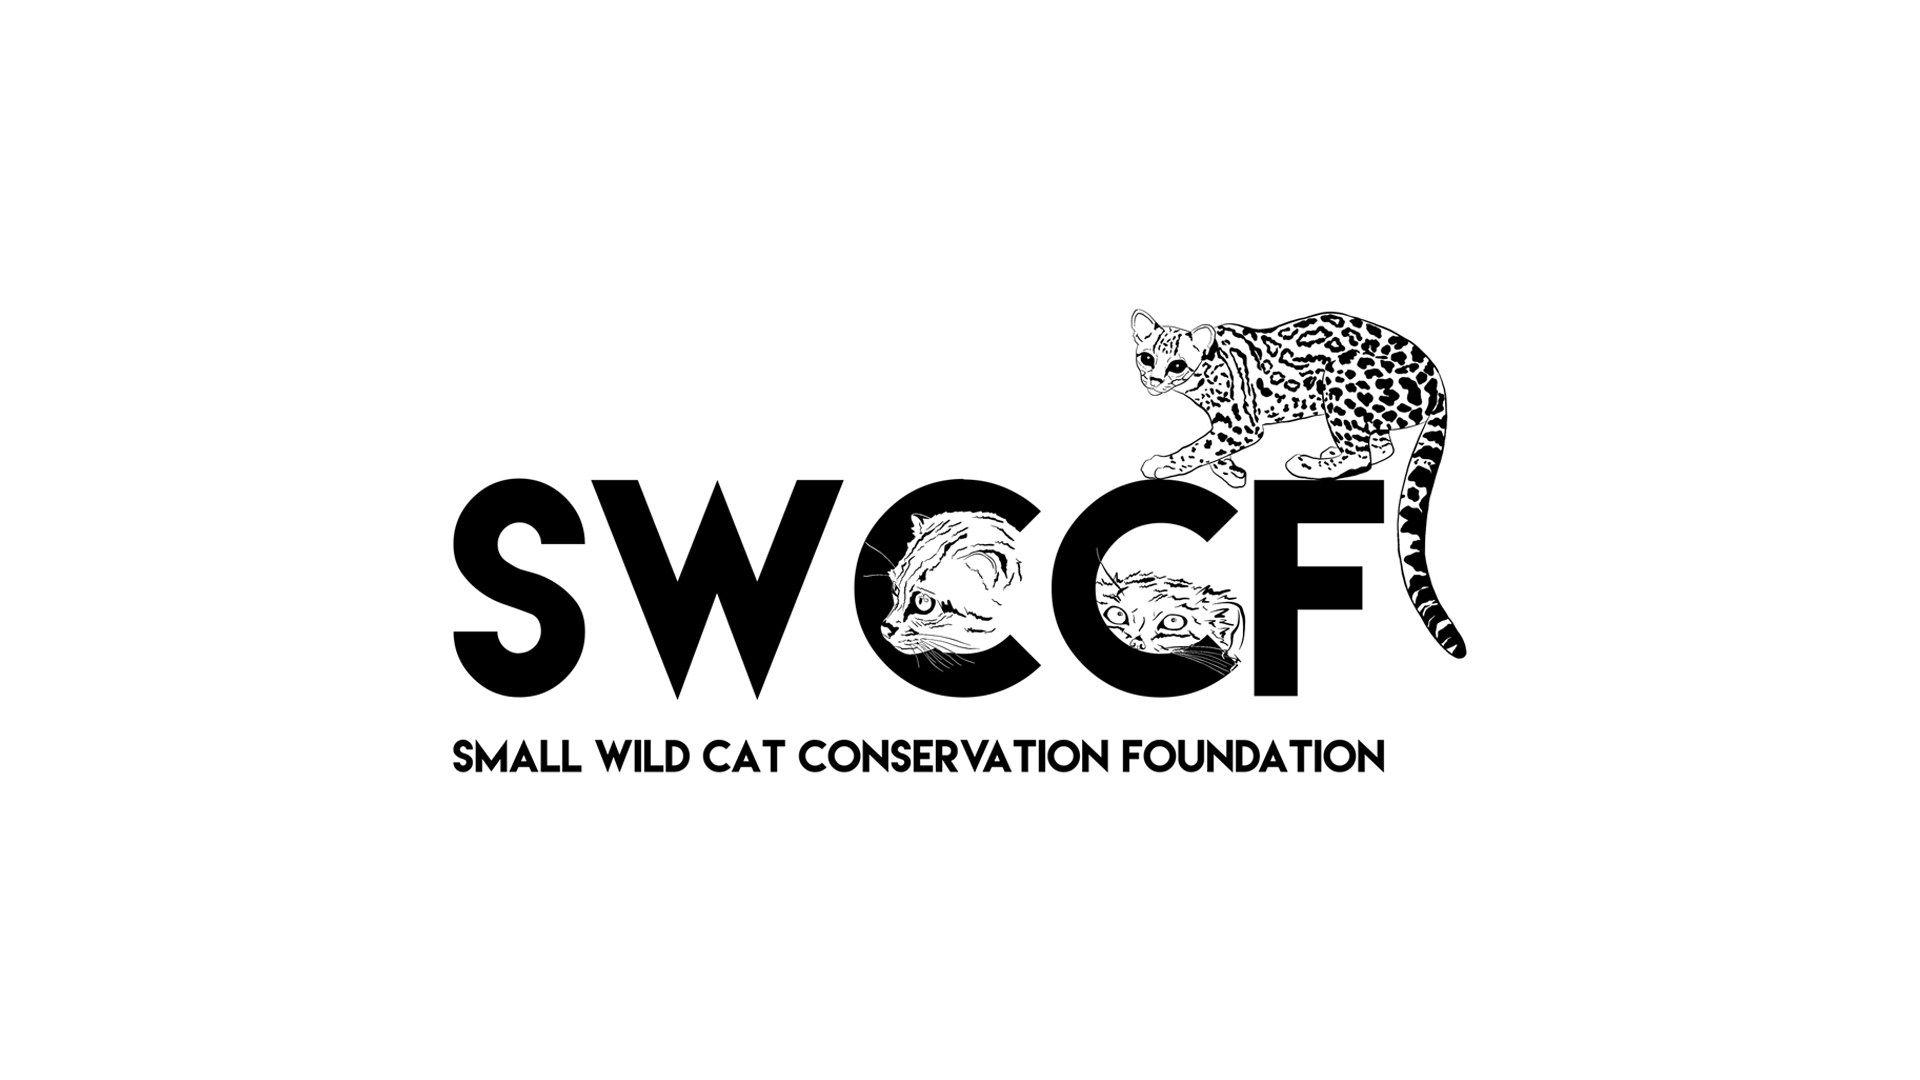 Small Cat Logo - Small Wild Cat Conservation Foundation